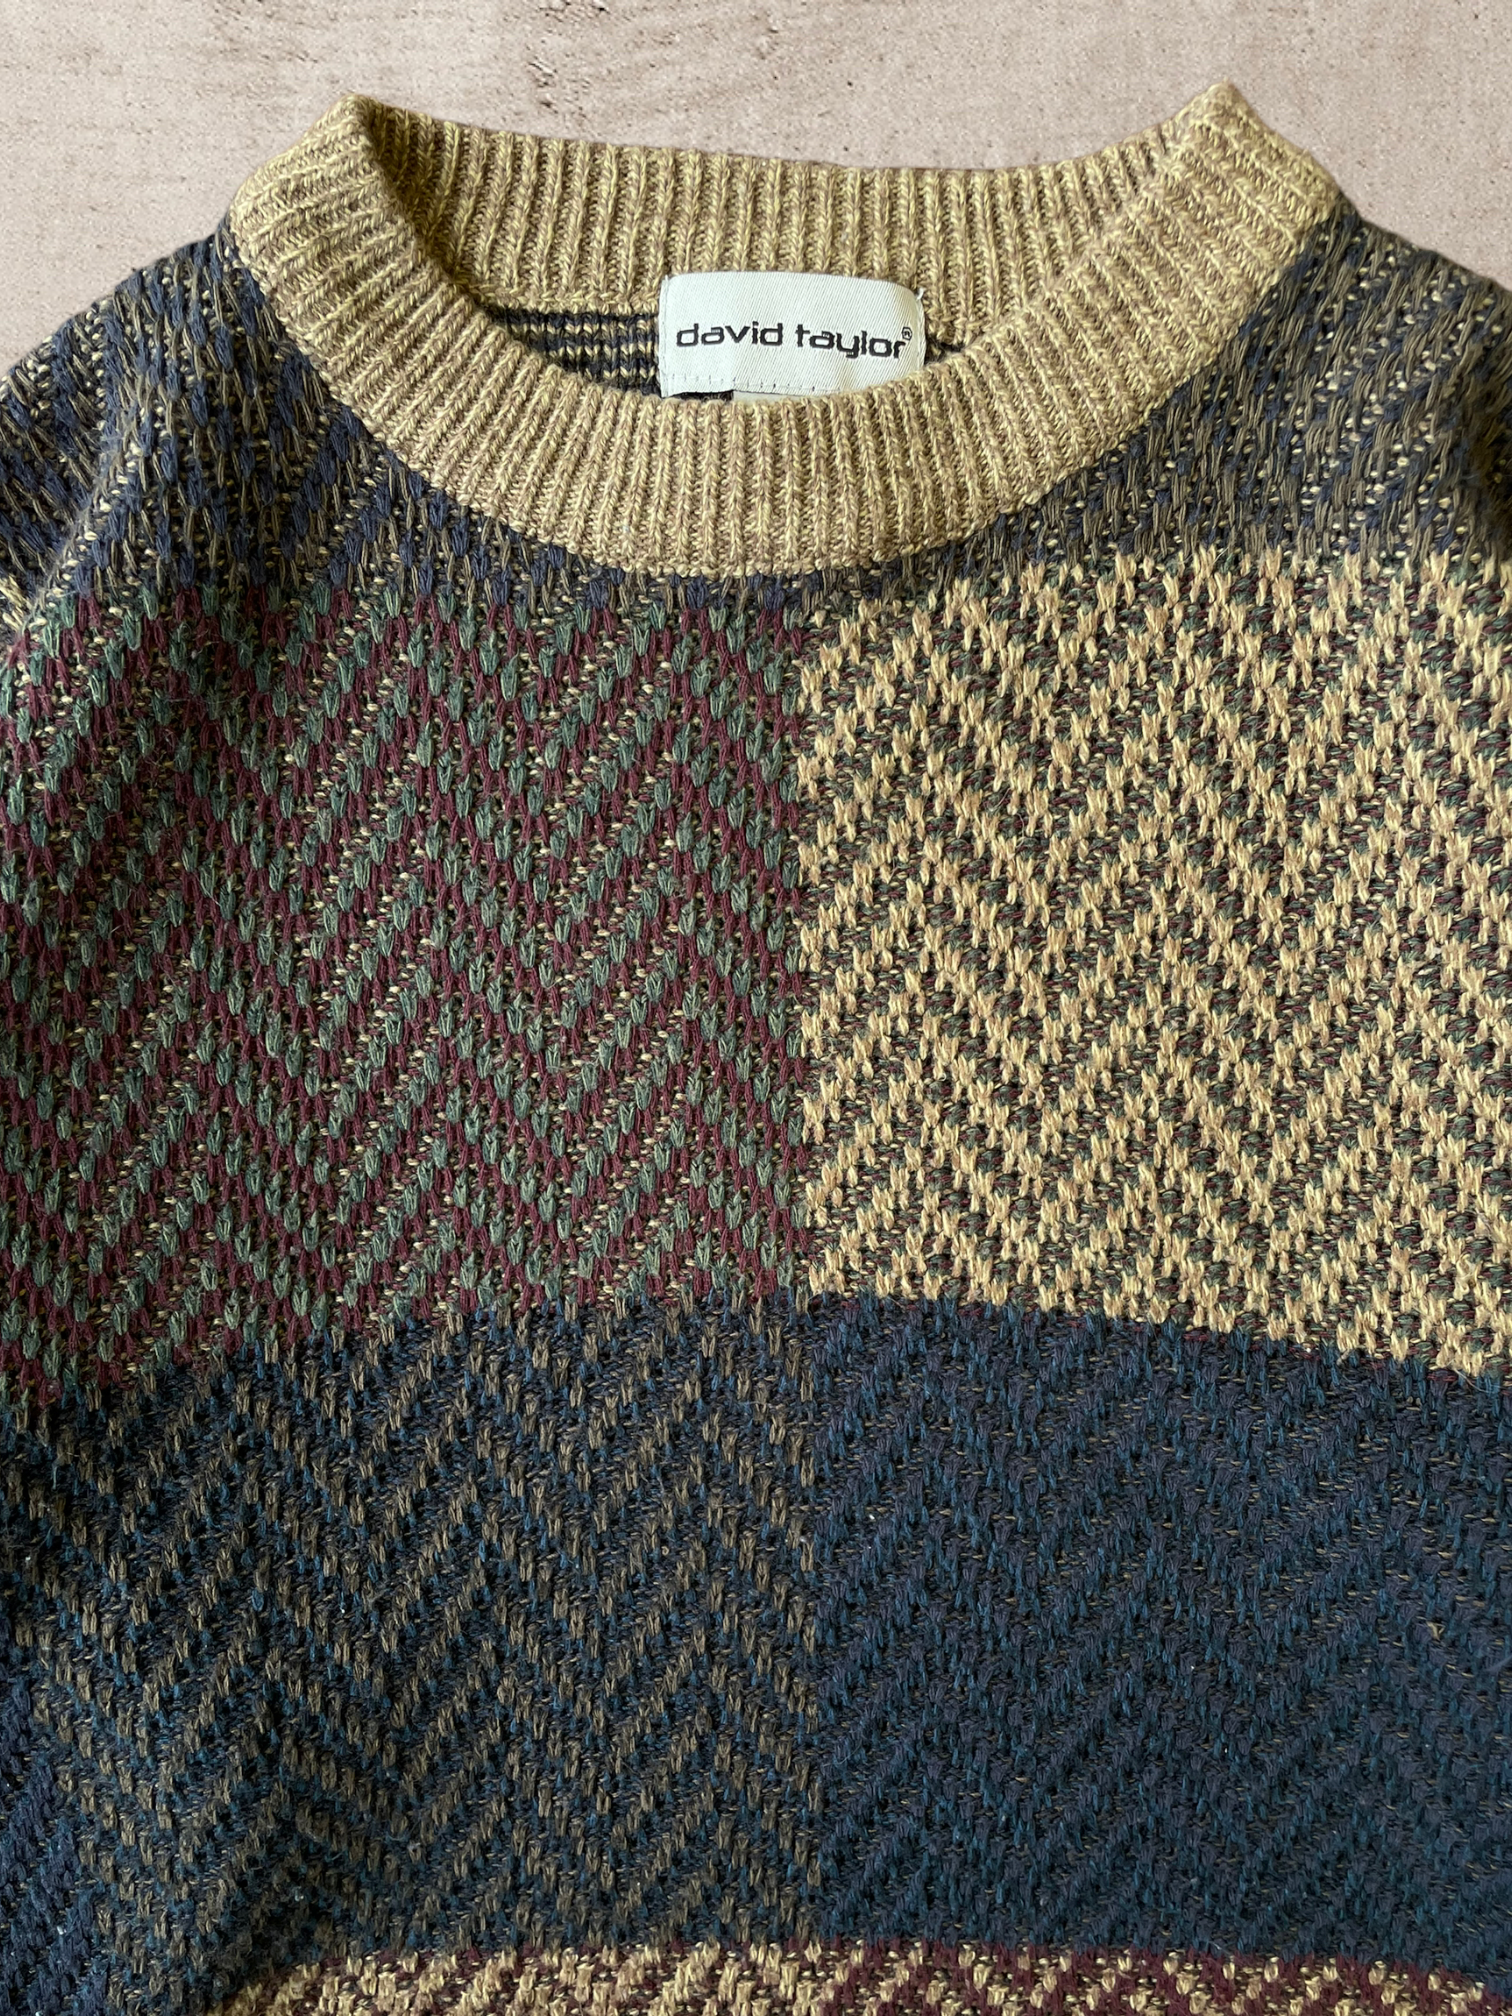 90s Multicolored Knit Sweater - Large